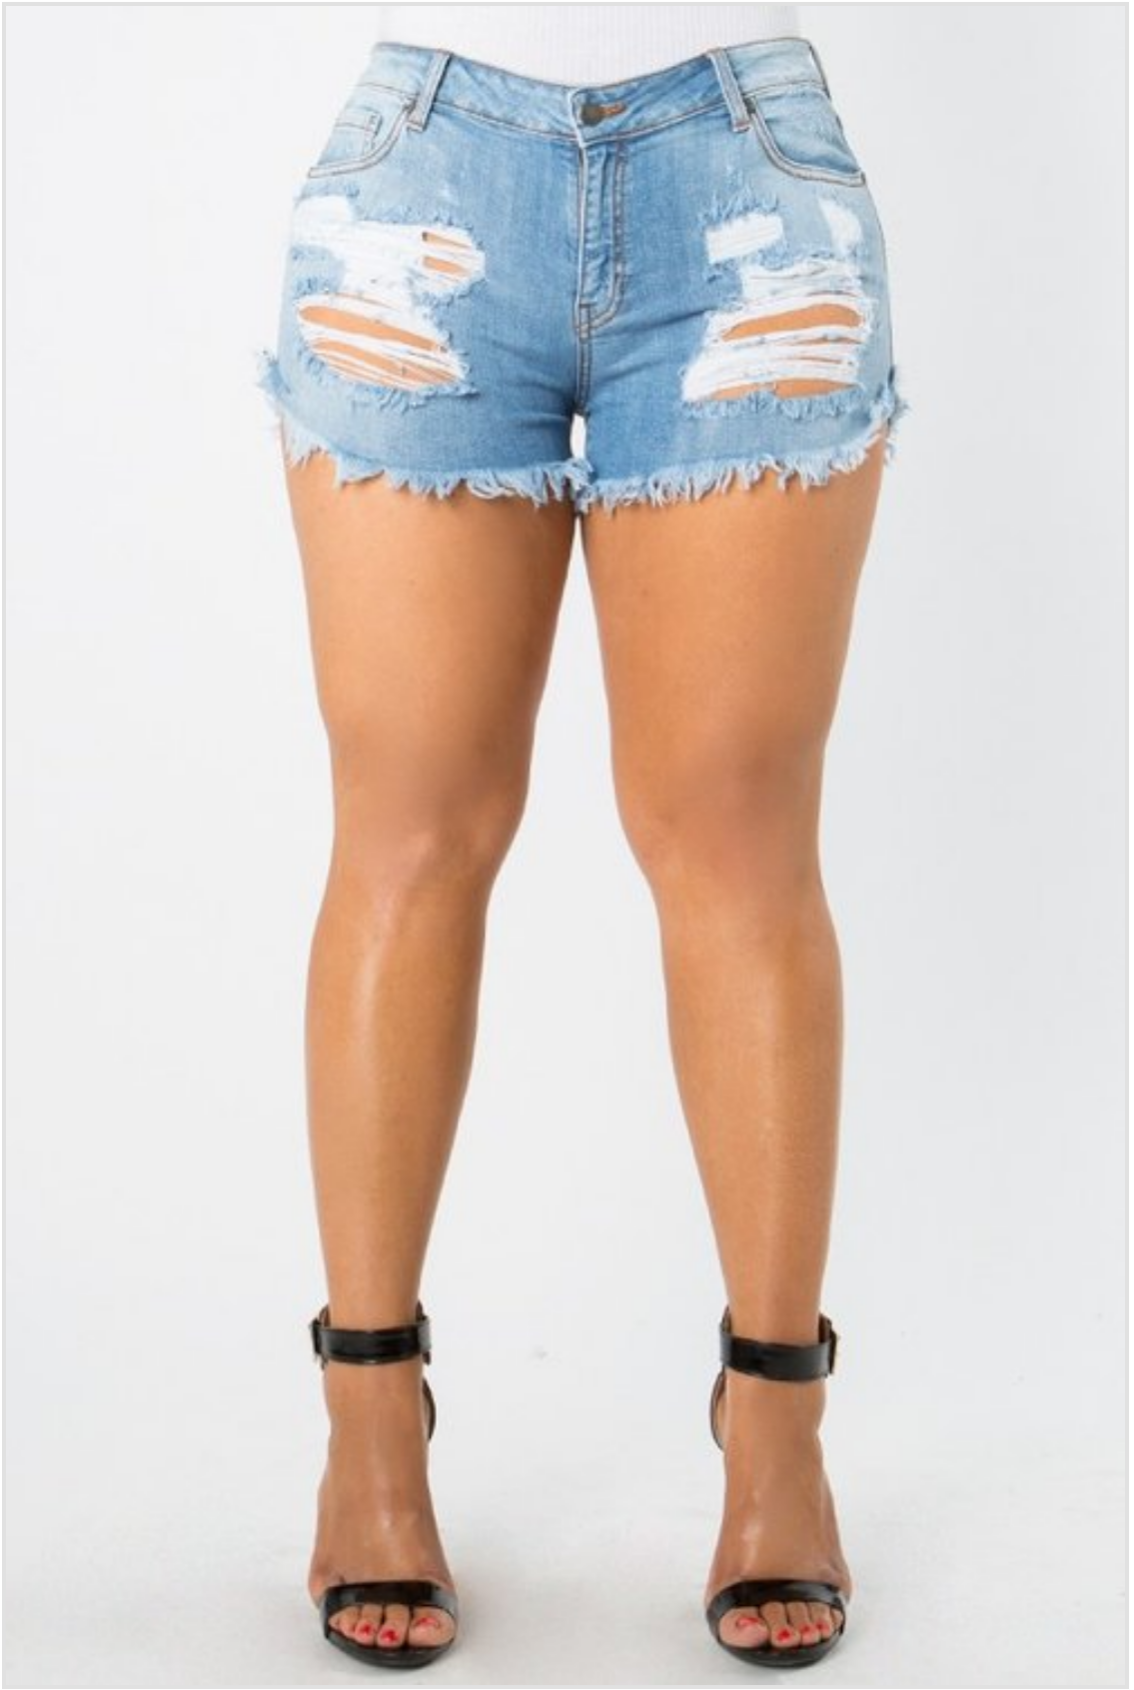 Plus Size NO STRESS Denim Shorts in Light Blue Wash - Flyy By Nyte 